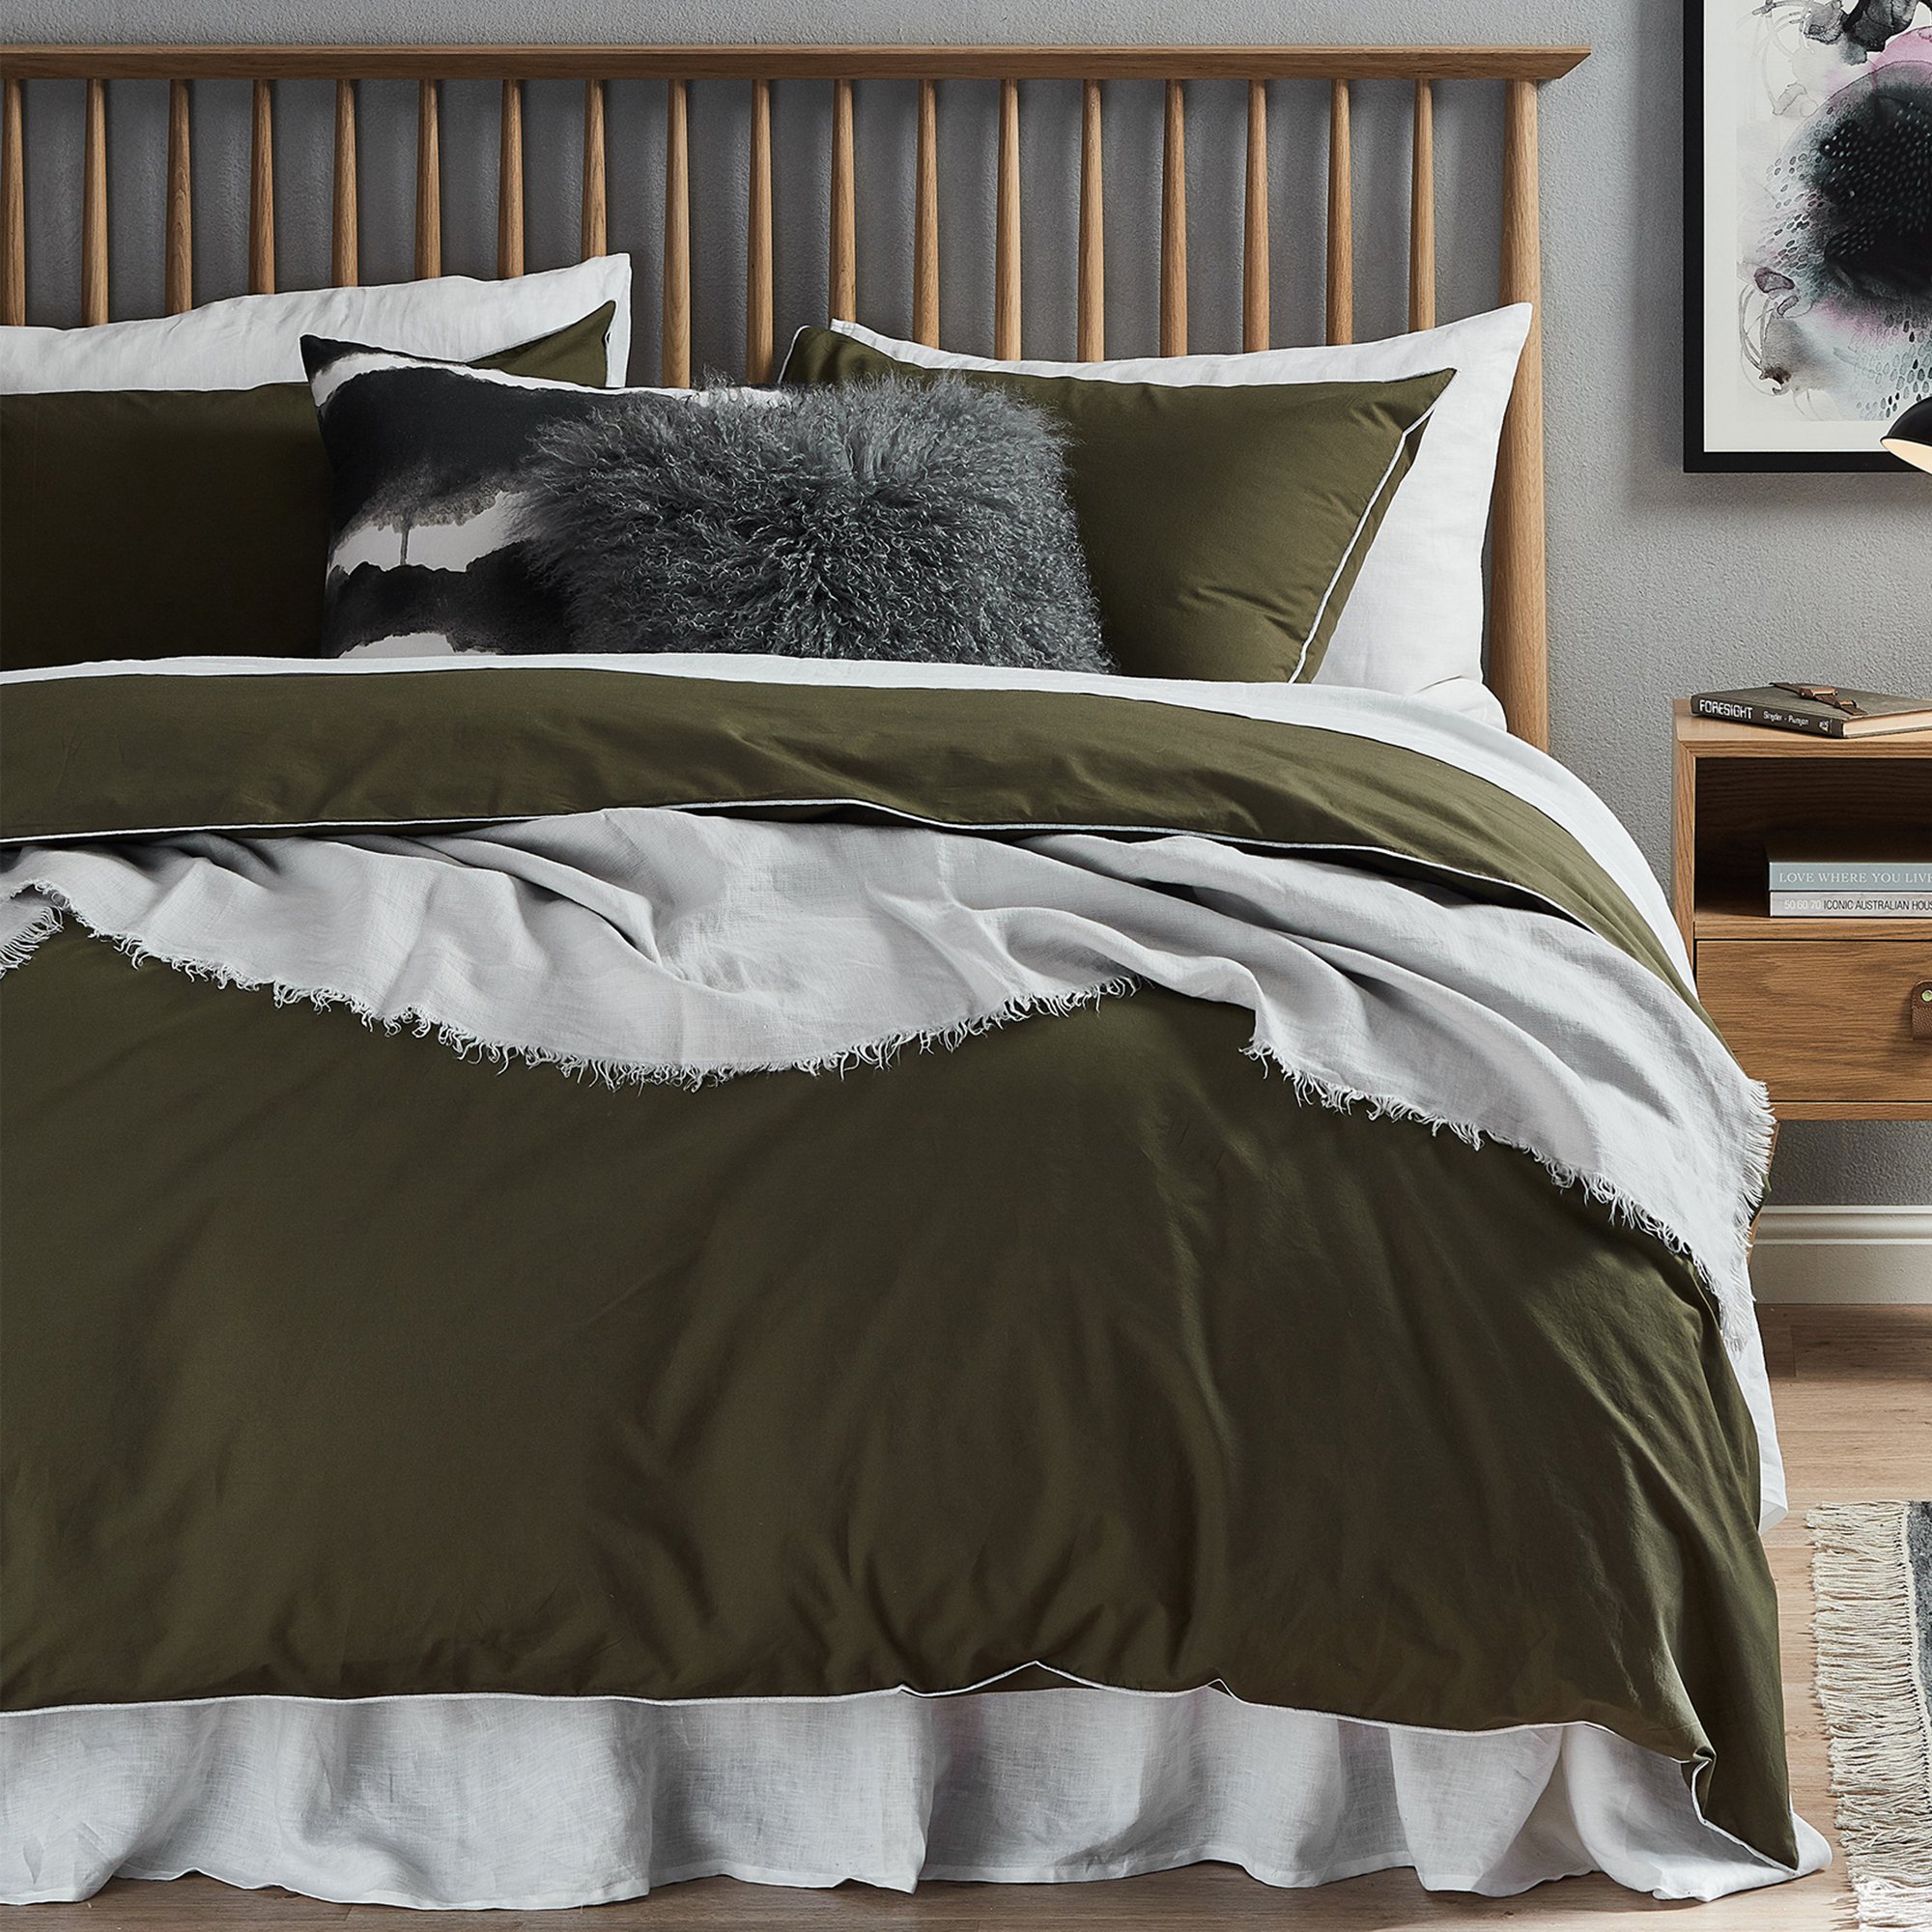 Temple Webster Olive Organic Cotton Quilt Cover Set Reviews